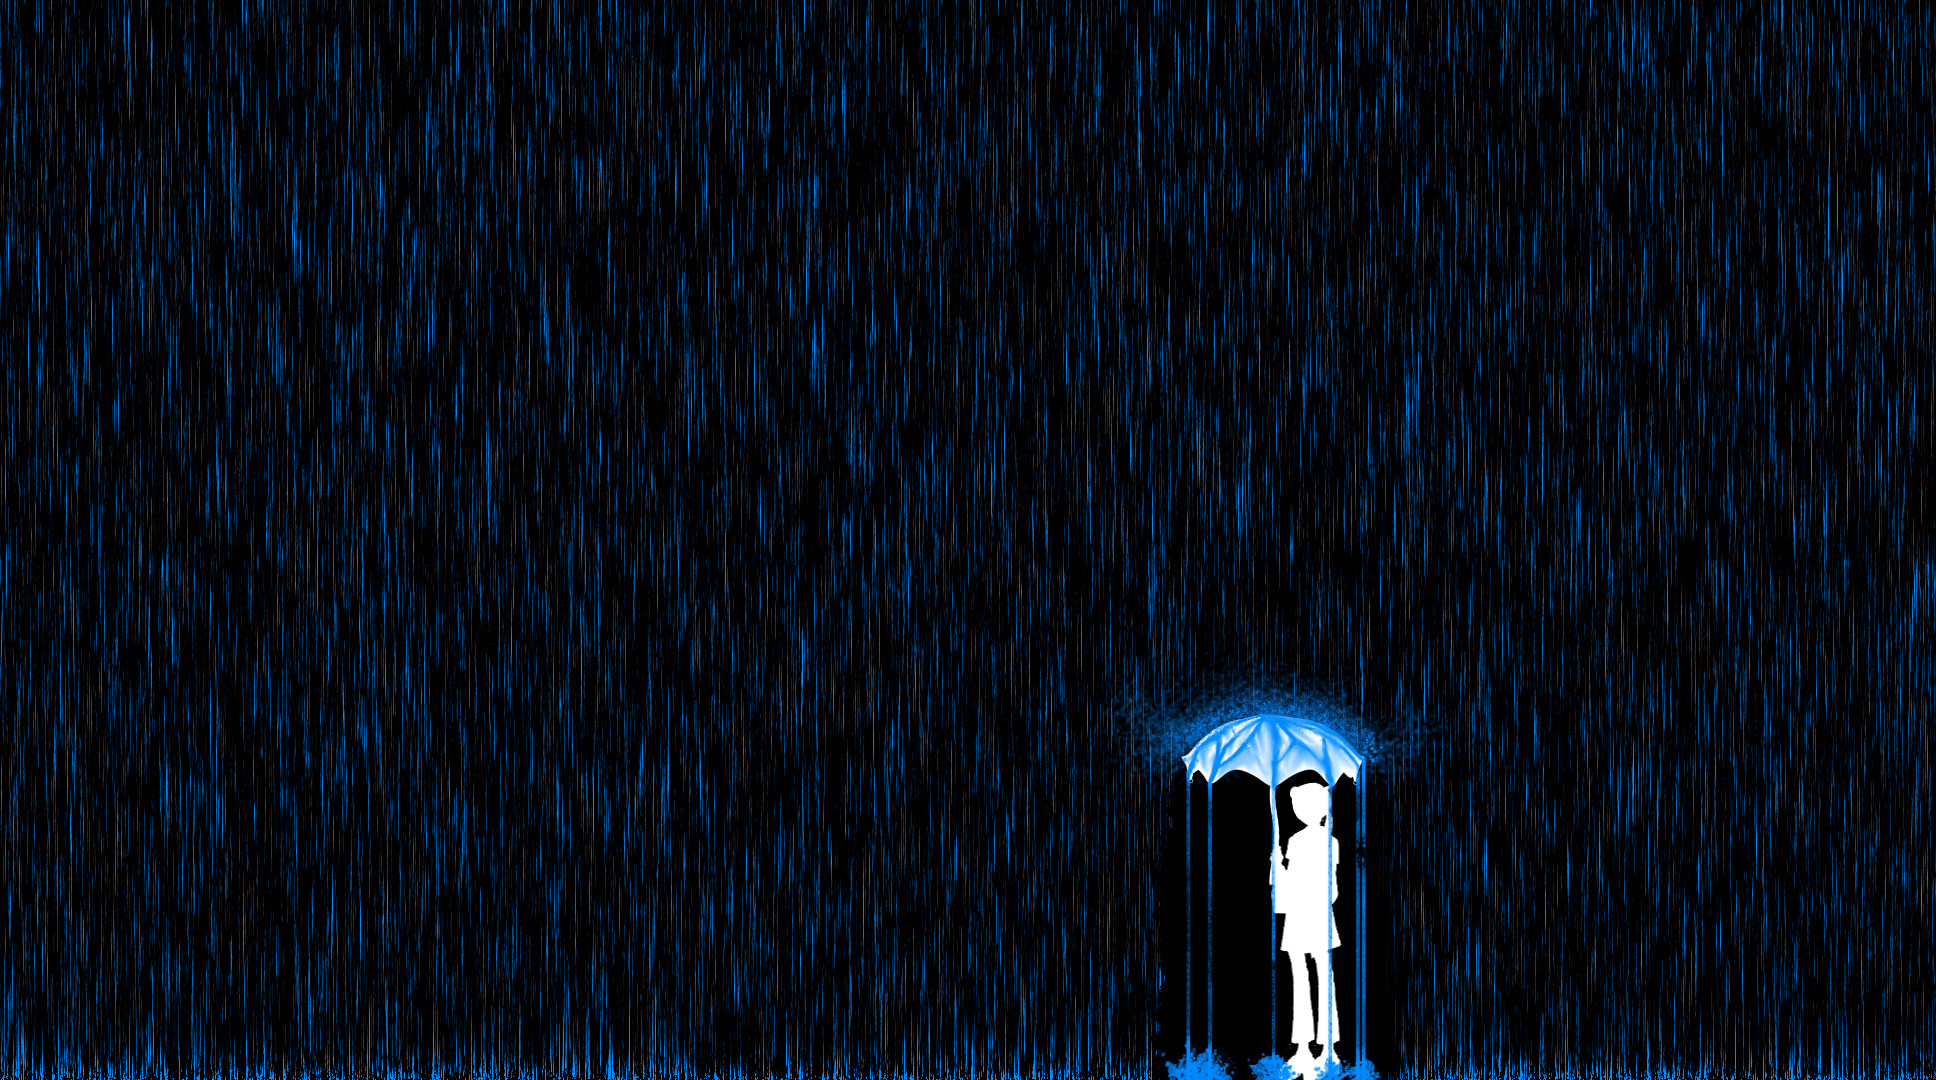 Quote About Rainy Day Wallpapers